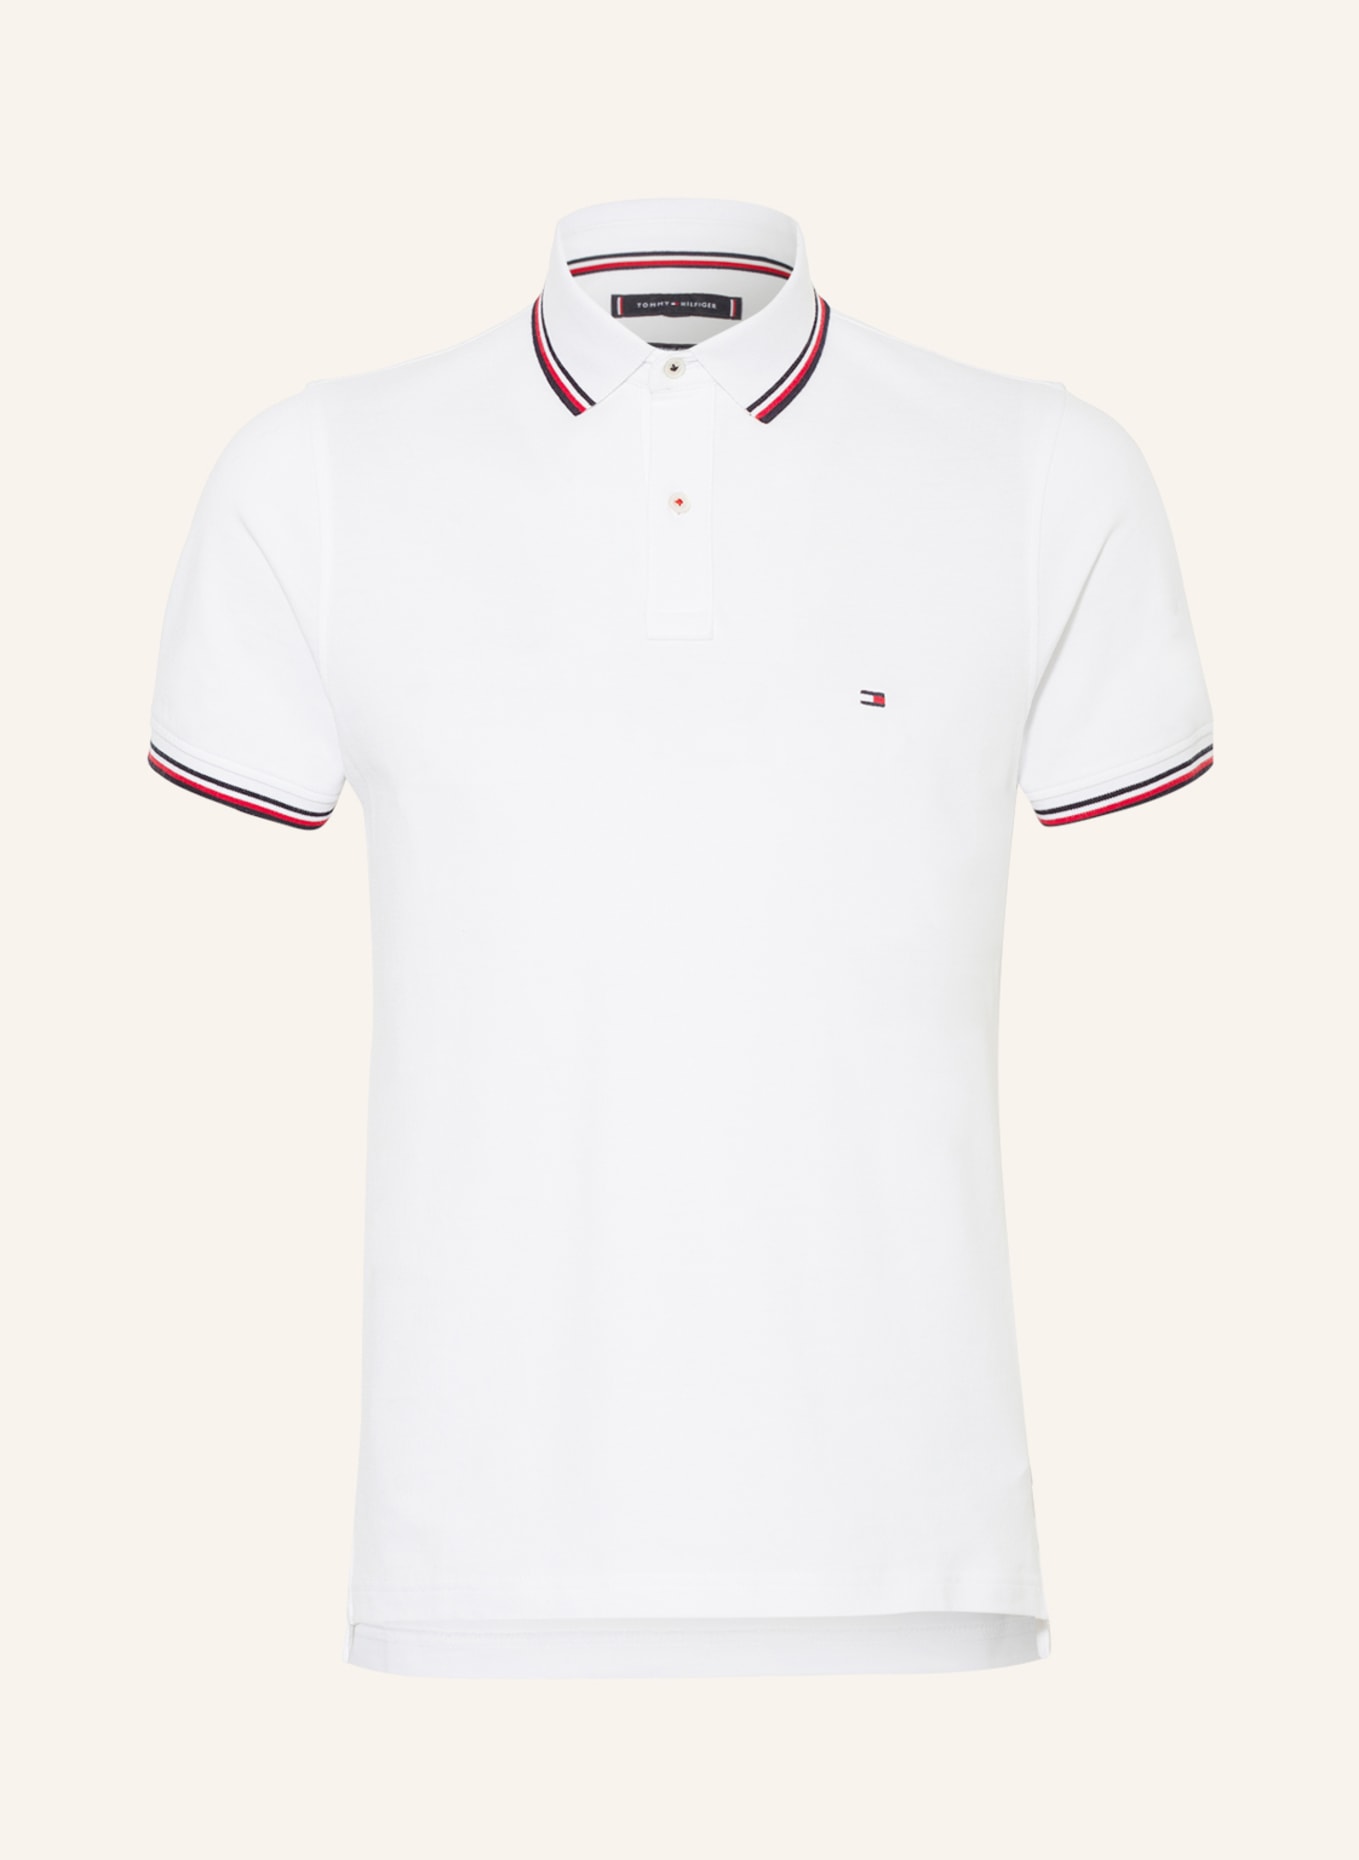 Gud Instrument kyst TOMMY HILFIGER Piqué polo shirt slim fit in white